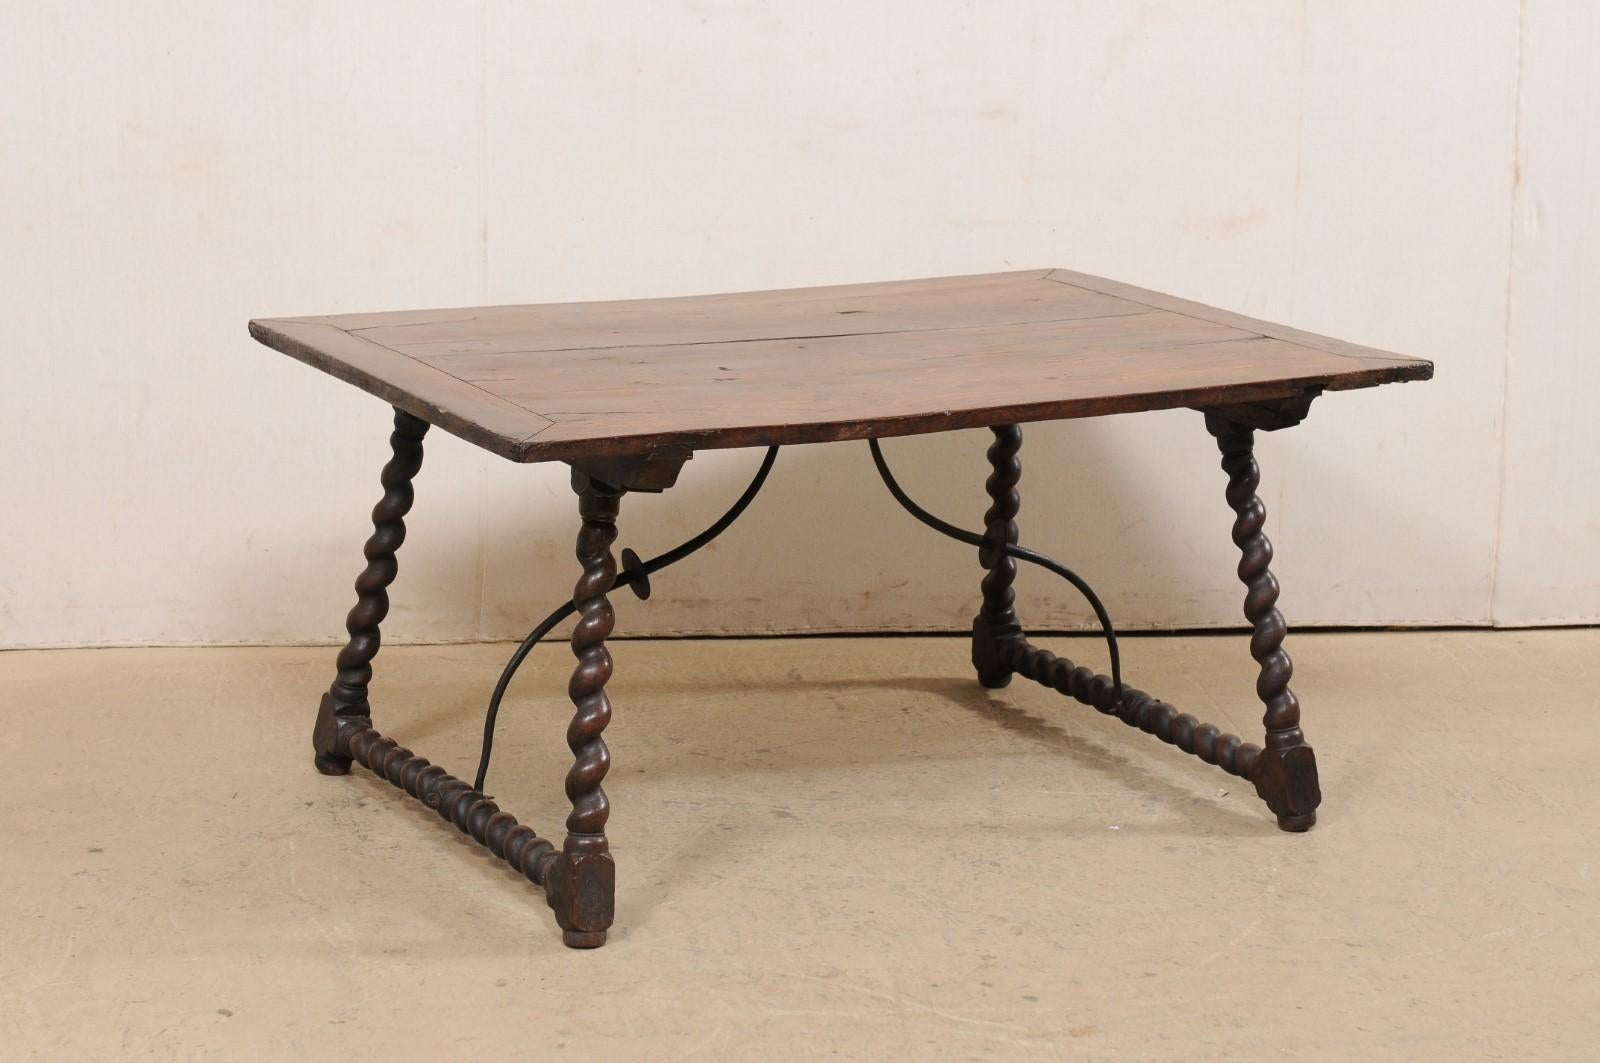 An Italian wooden barley twist leg table, with decorative forged-iron stretcher, from the early 18th century. This antique occasional table from Italy features a rectangular-shaped top, which is raised upon a pair of nicely-carved barley twist,